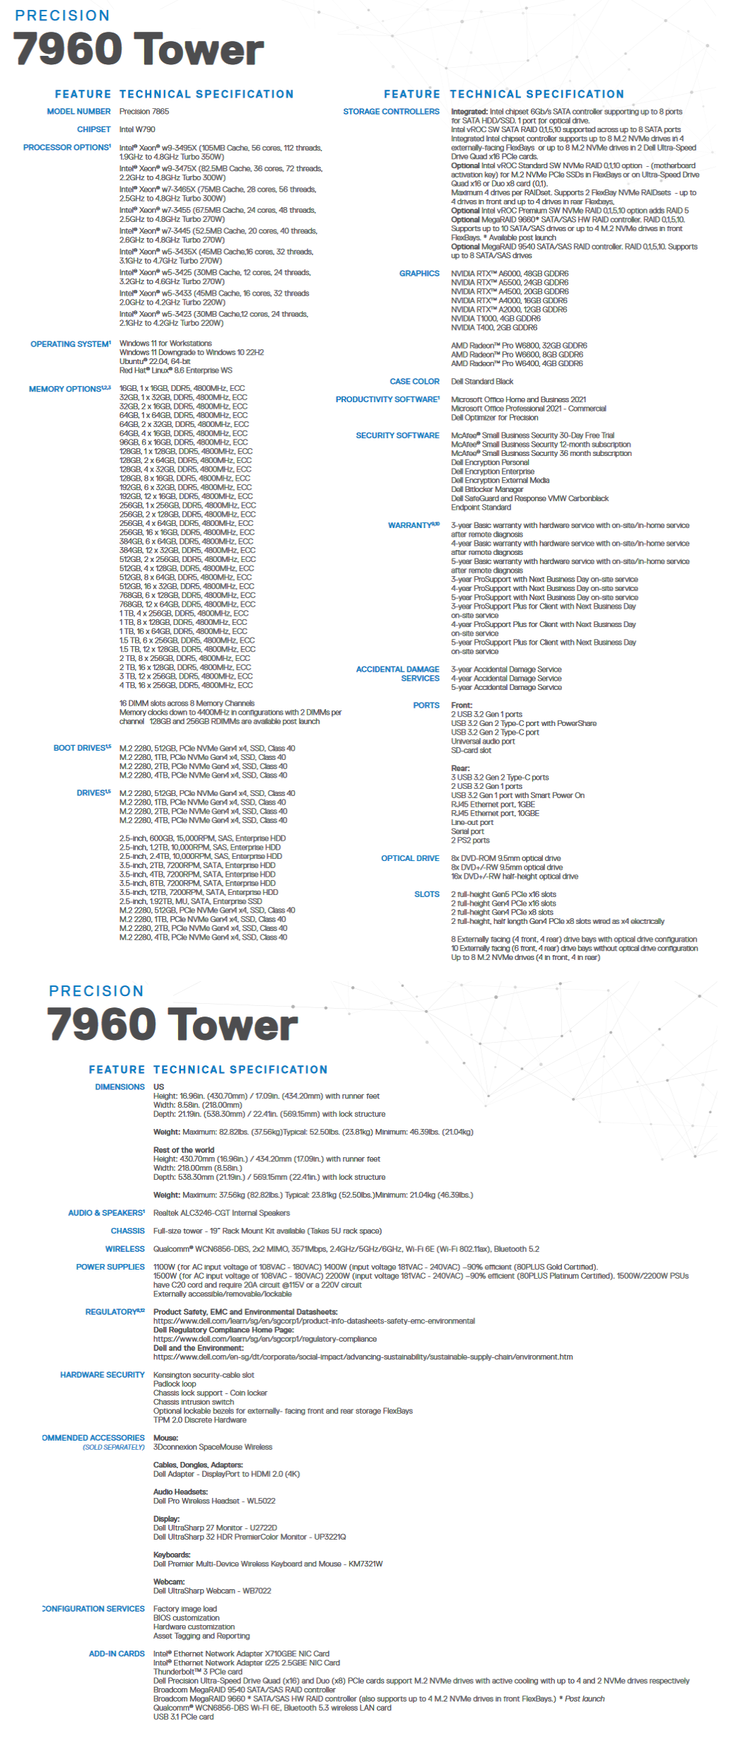 Dell Precision 7960 Tower specifications